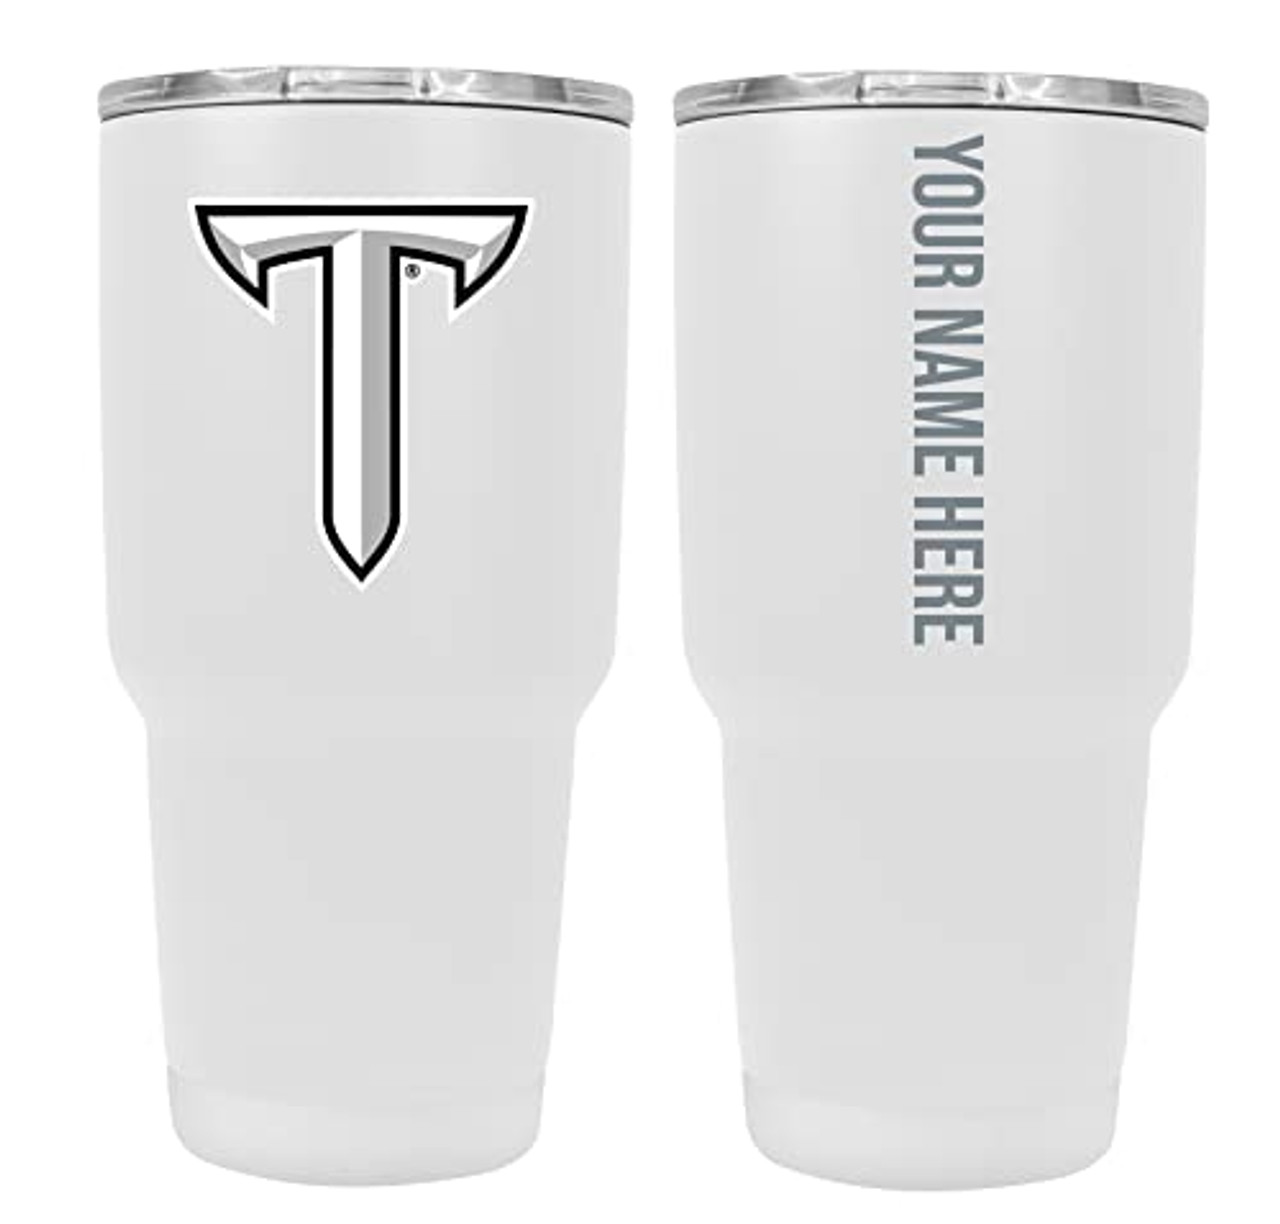 Collegiate Custom Personalized Troy University, 24 oz Insulated Stainless Steel Tumbler with Engraved Name (White)